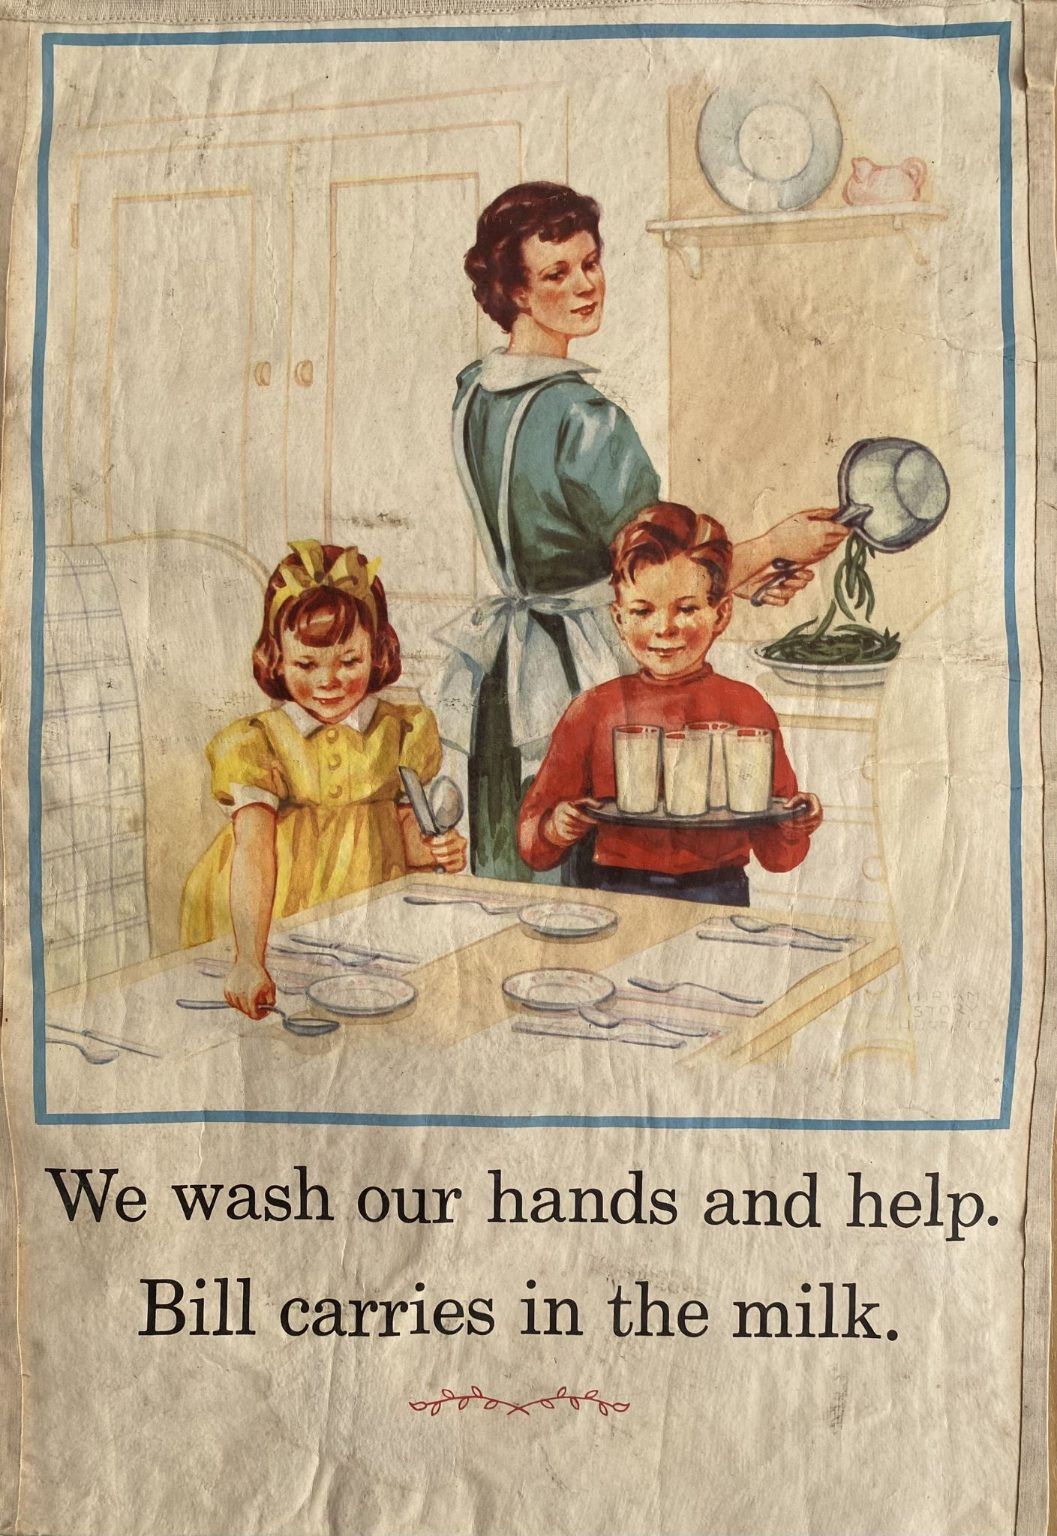 VINTAGE POSTER: We wash our hands and help - Bill carries in the milk